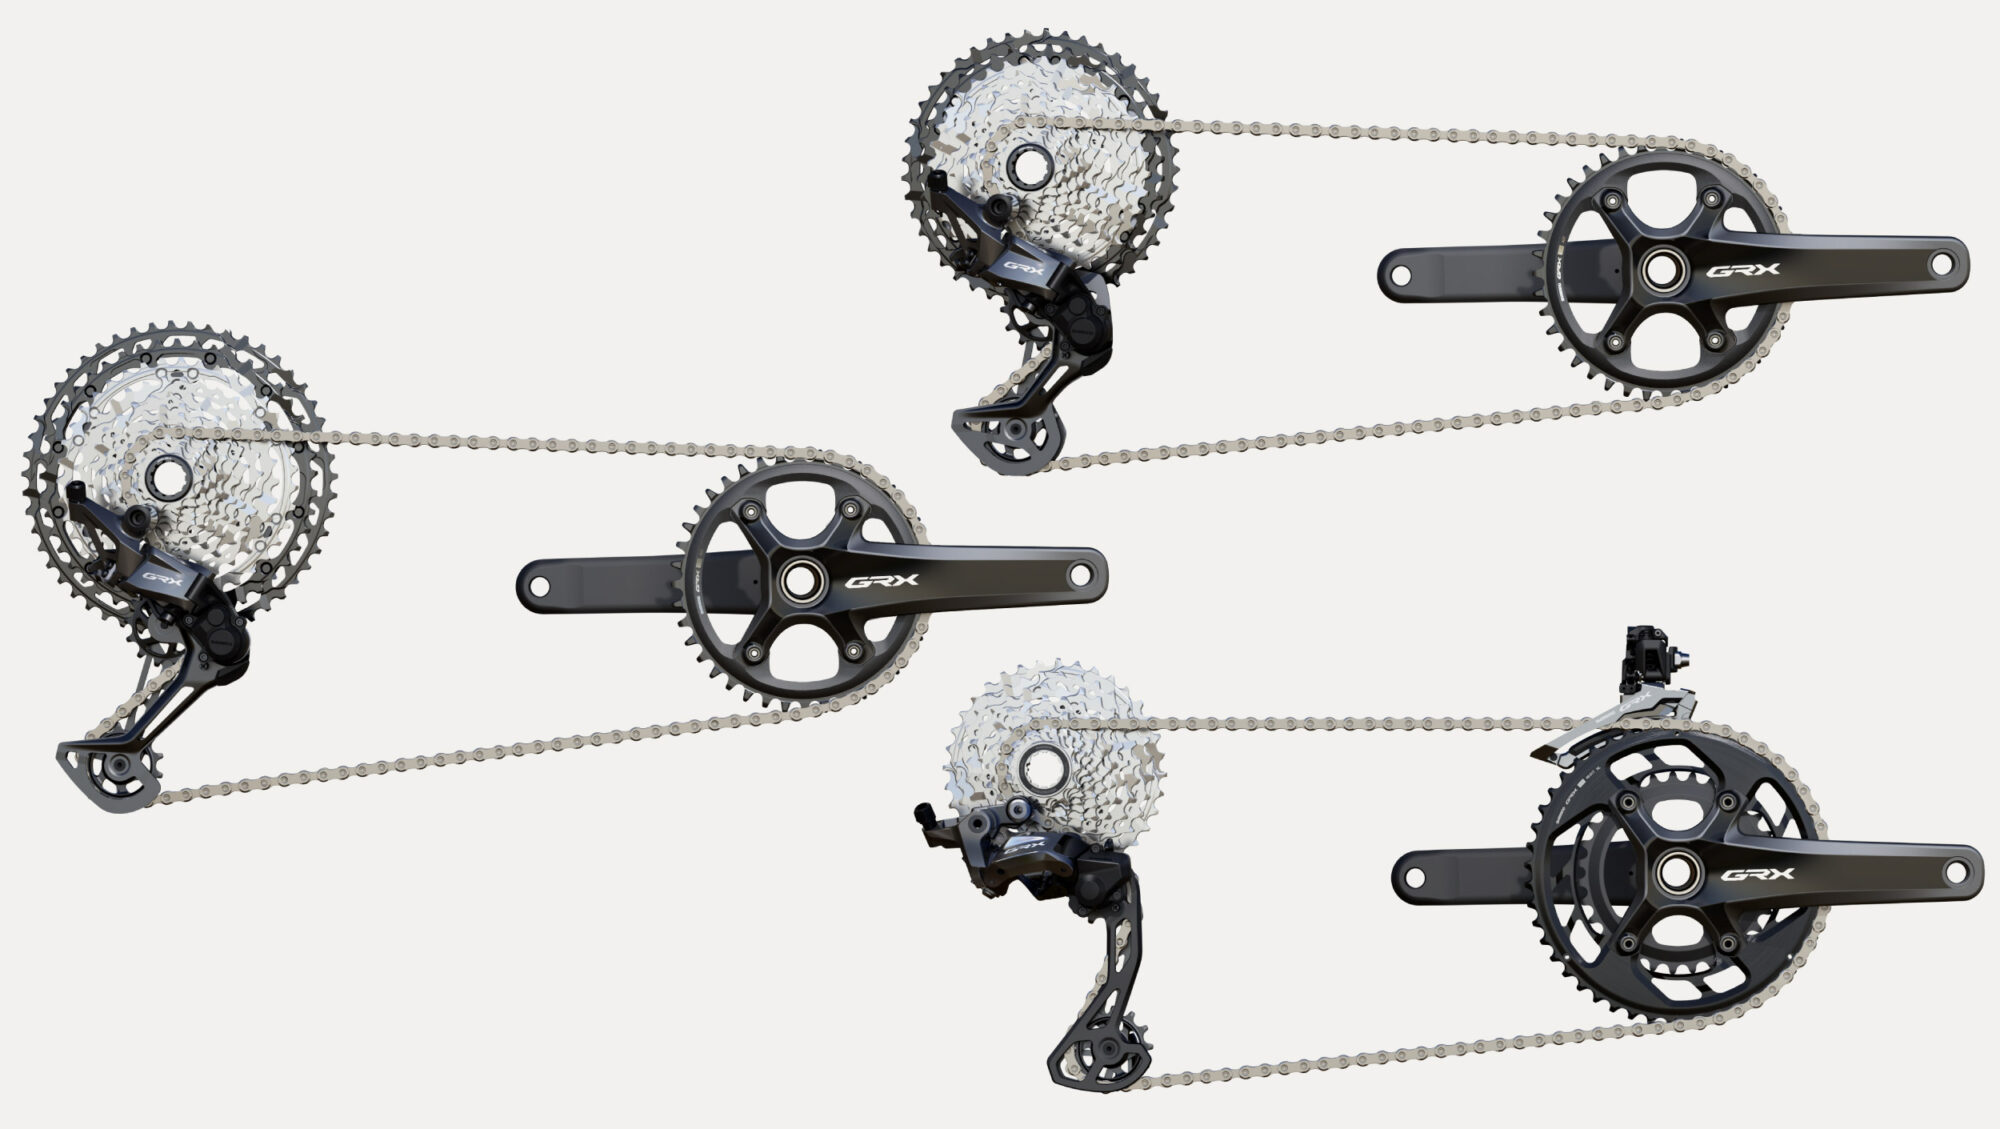 Shimano GRX 12-speed Groupsets